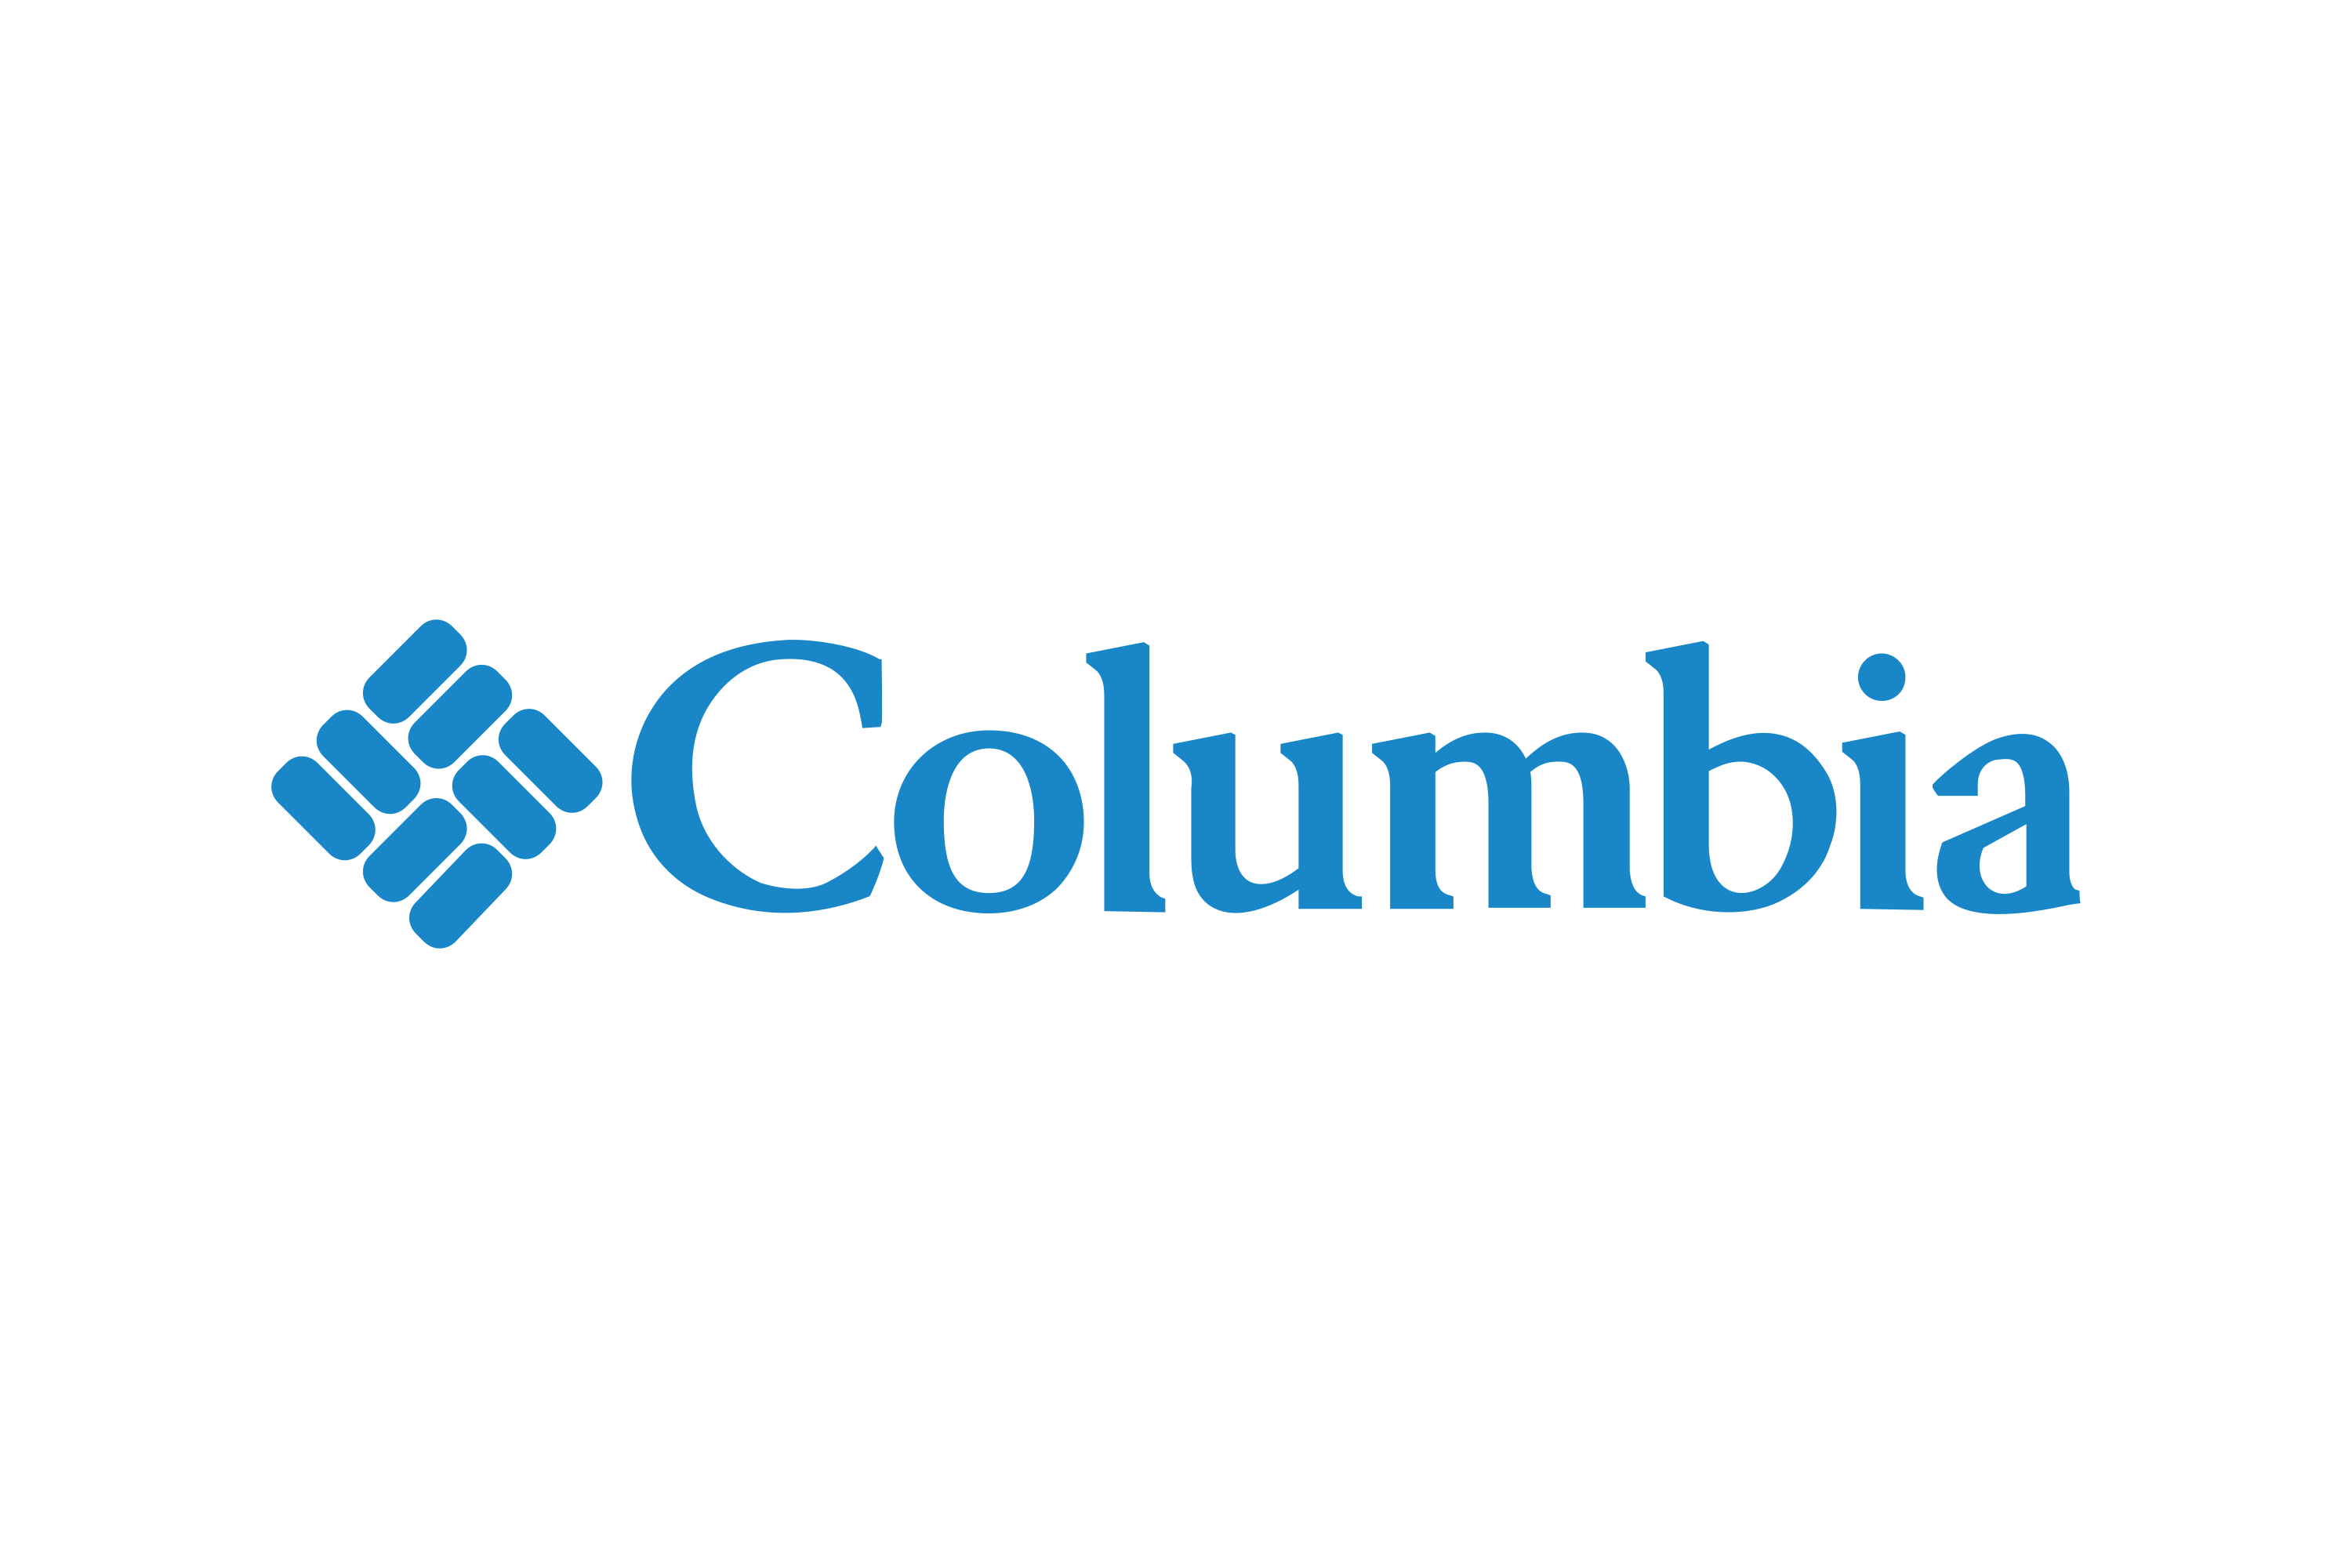 Columbia Sportswear Black Friday: 25% Off Everything, 50% Off Doorbusters, 40% Off Select Footwear + Free Shipping